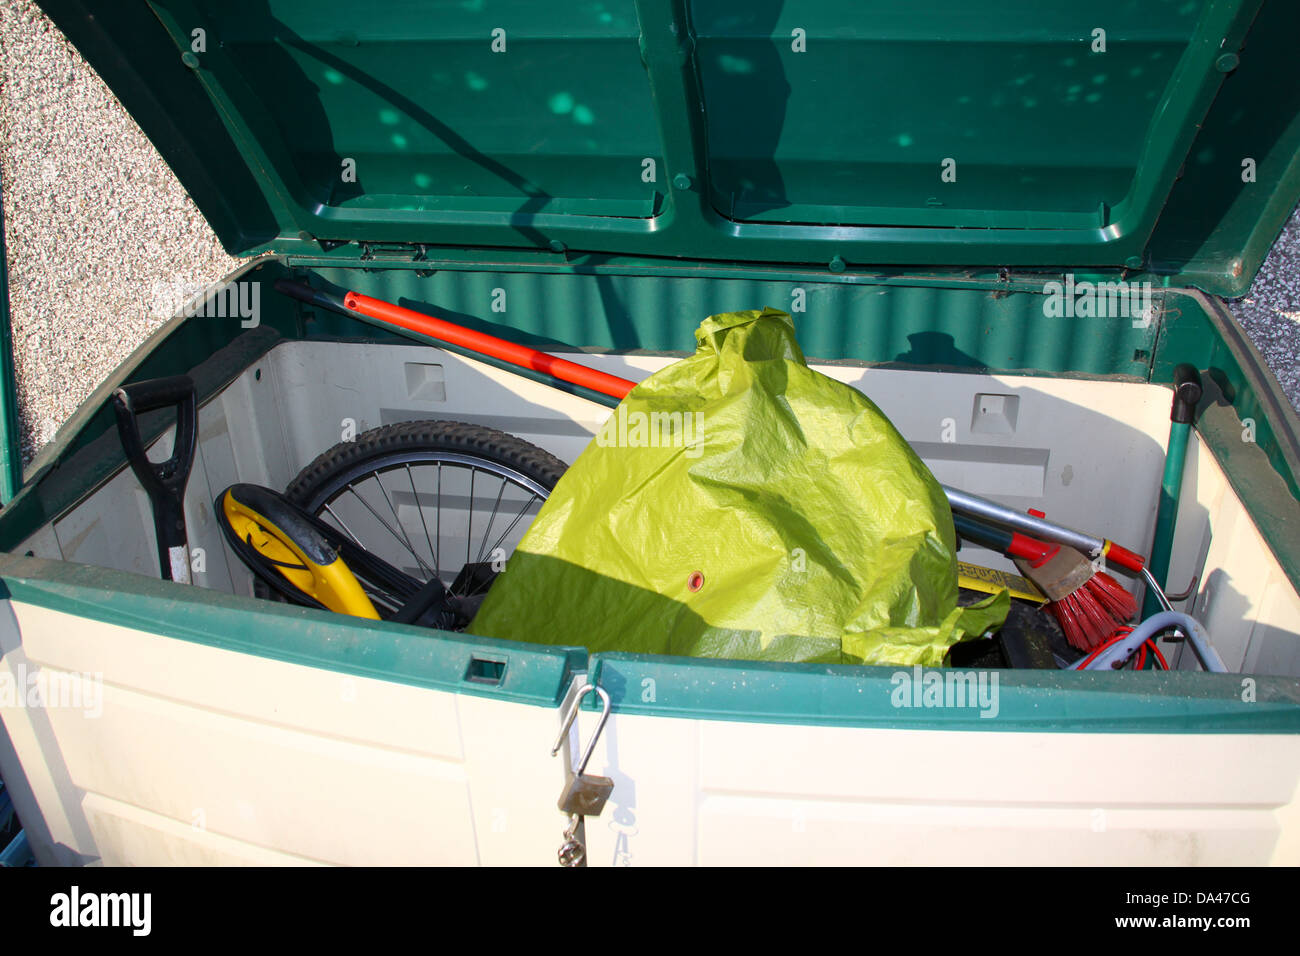 Plastic garden storage box with typical garden and outdoor items Stock  Photo - Alamy